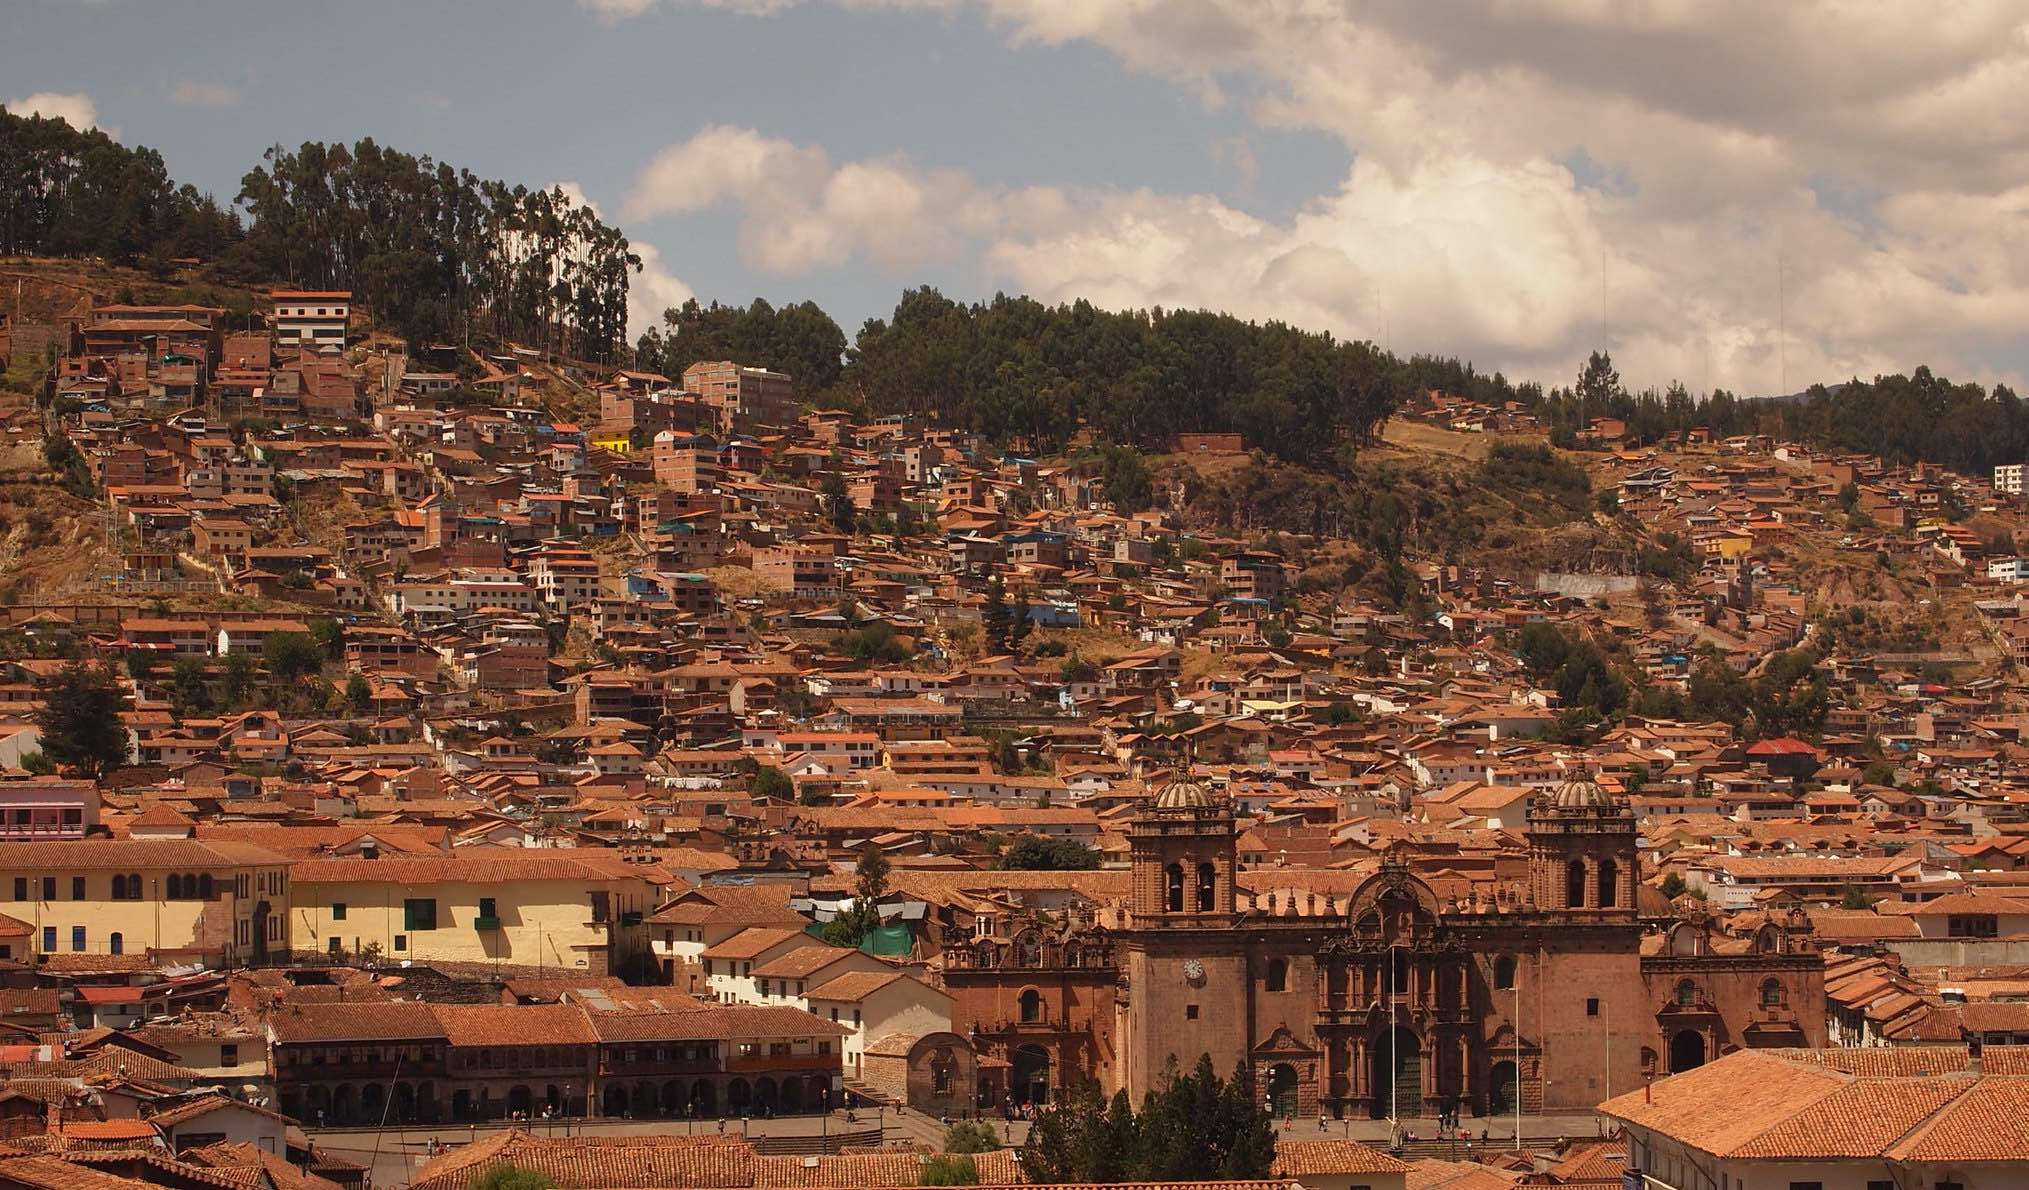 The Peruvian city of Cusco, where a Hong Kong man died of COVID-19 last week. Photo via Flickr/Leo Gonzales.